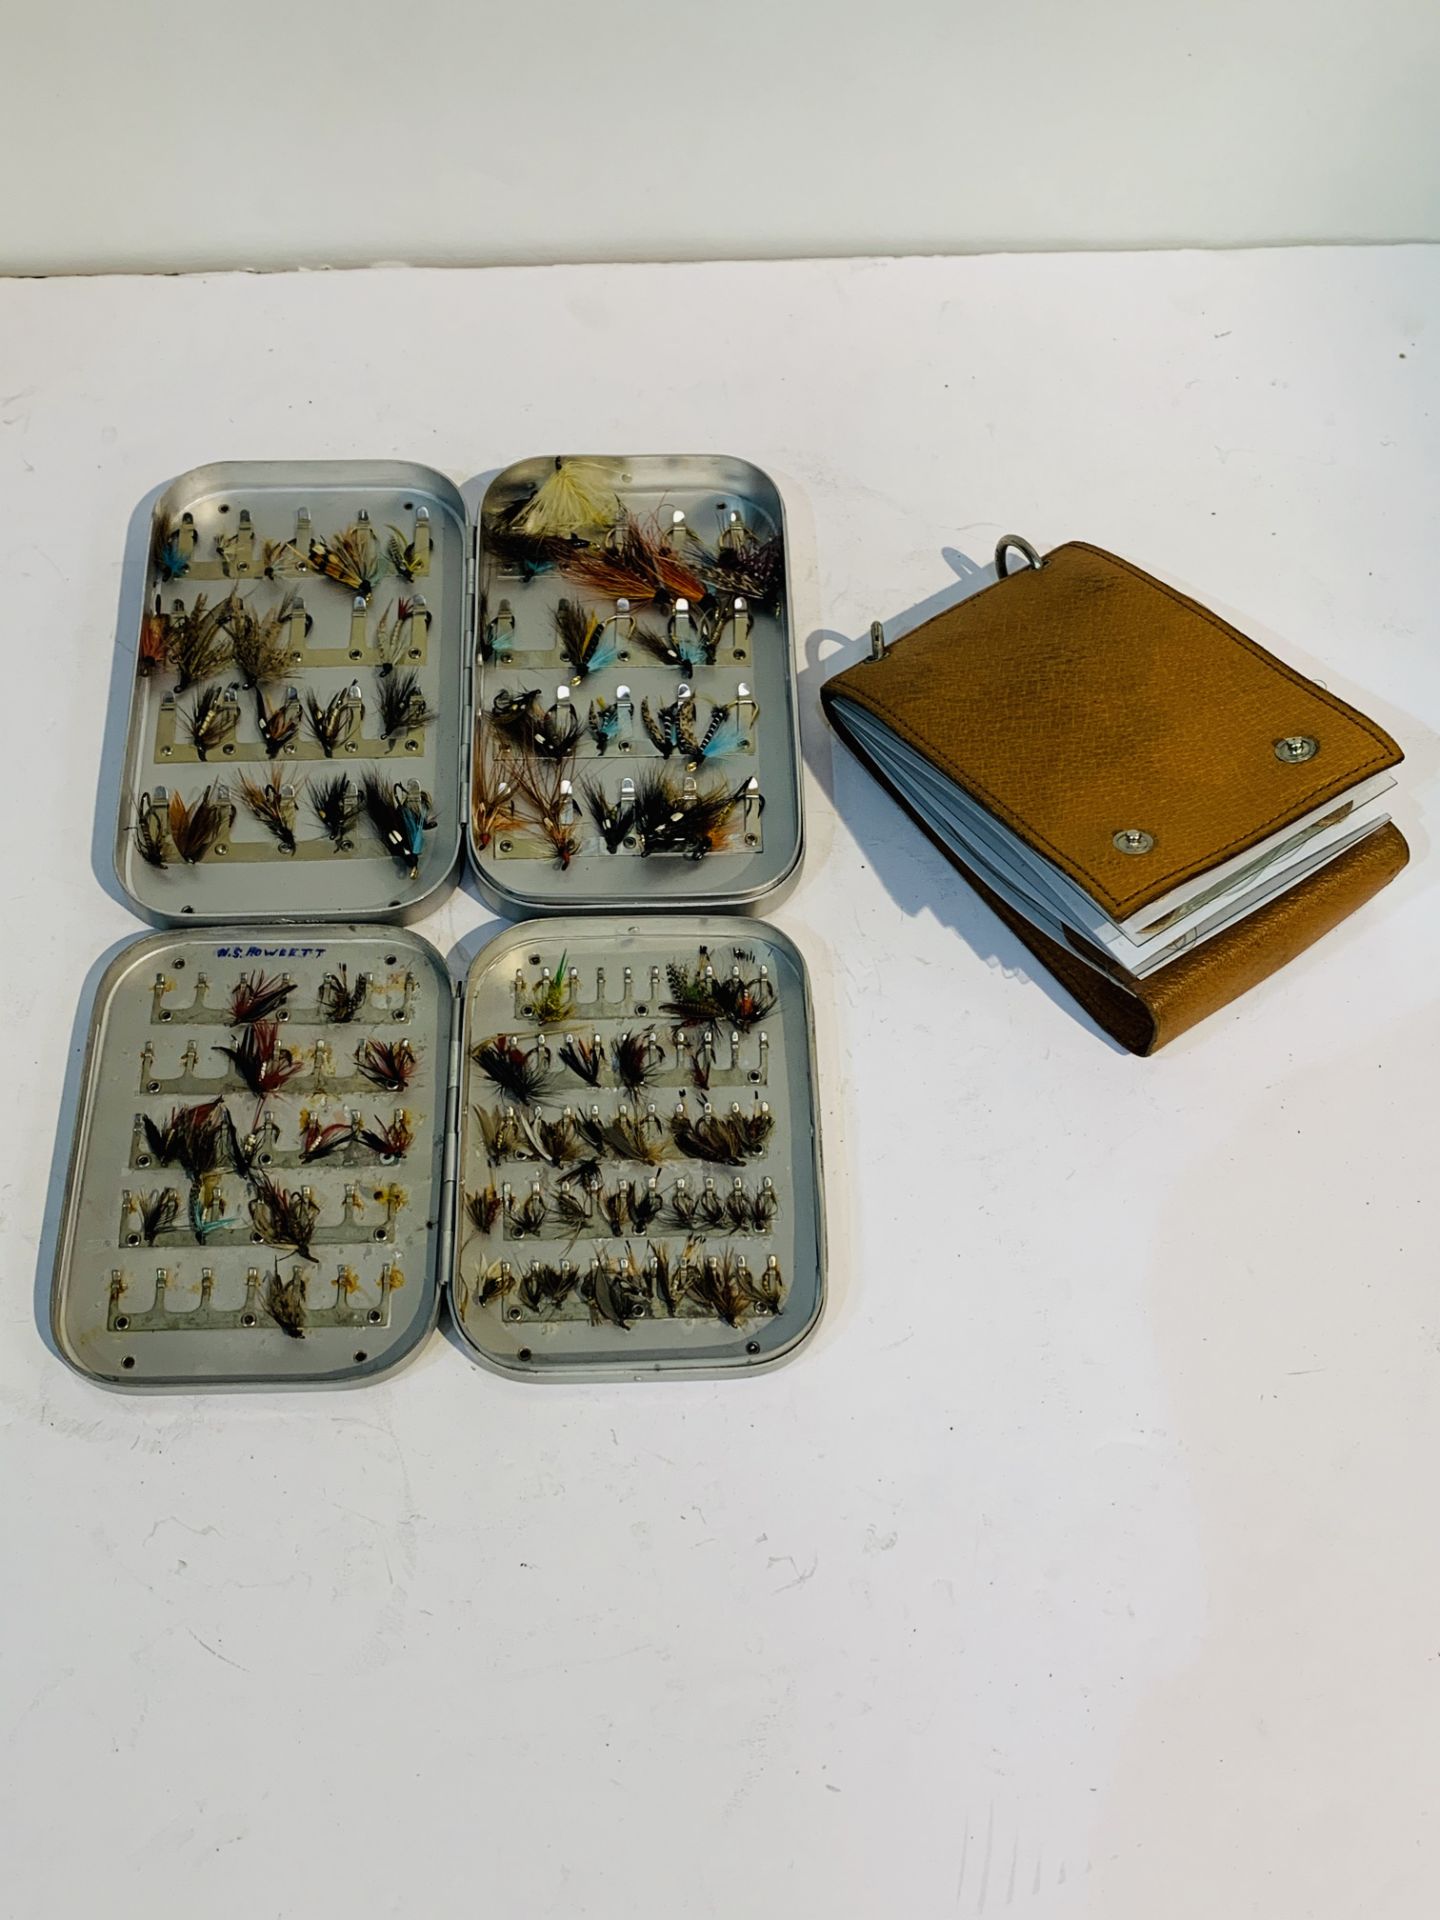 Two cases of fly fishing flies together with a Jackson's cast book.